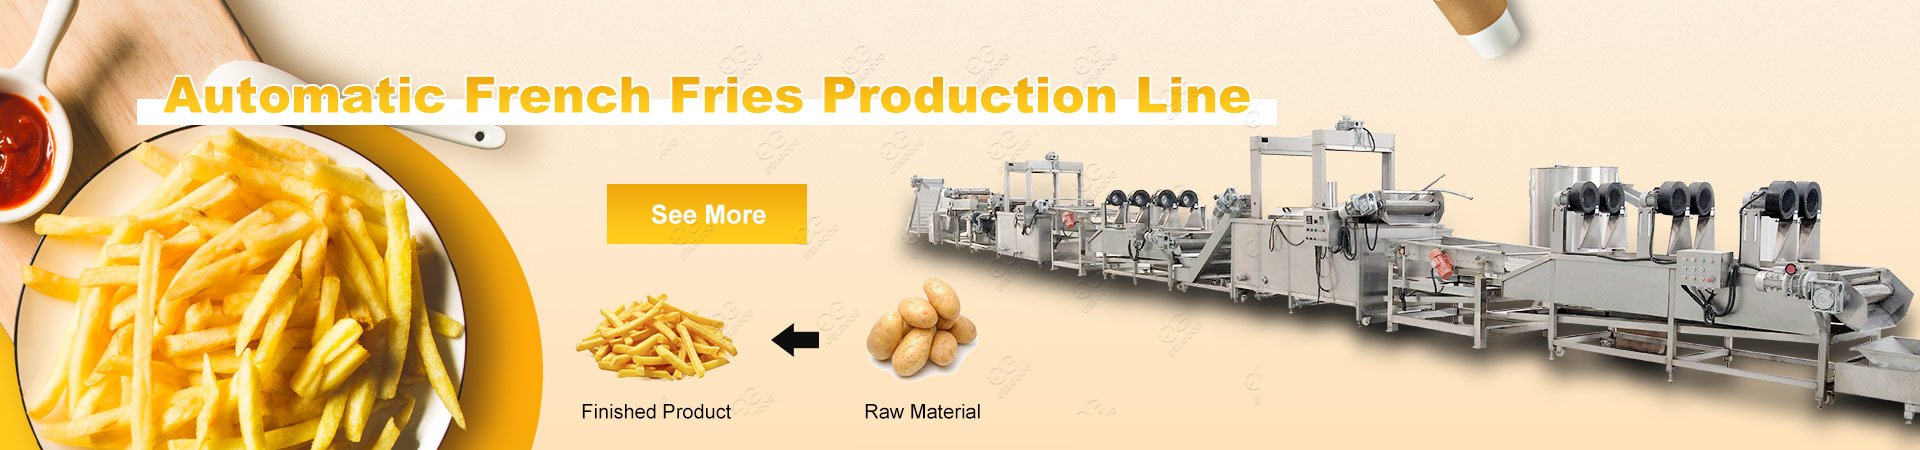 Automatic French Fries Plant